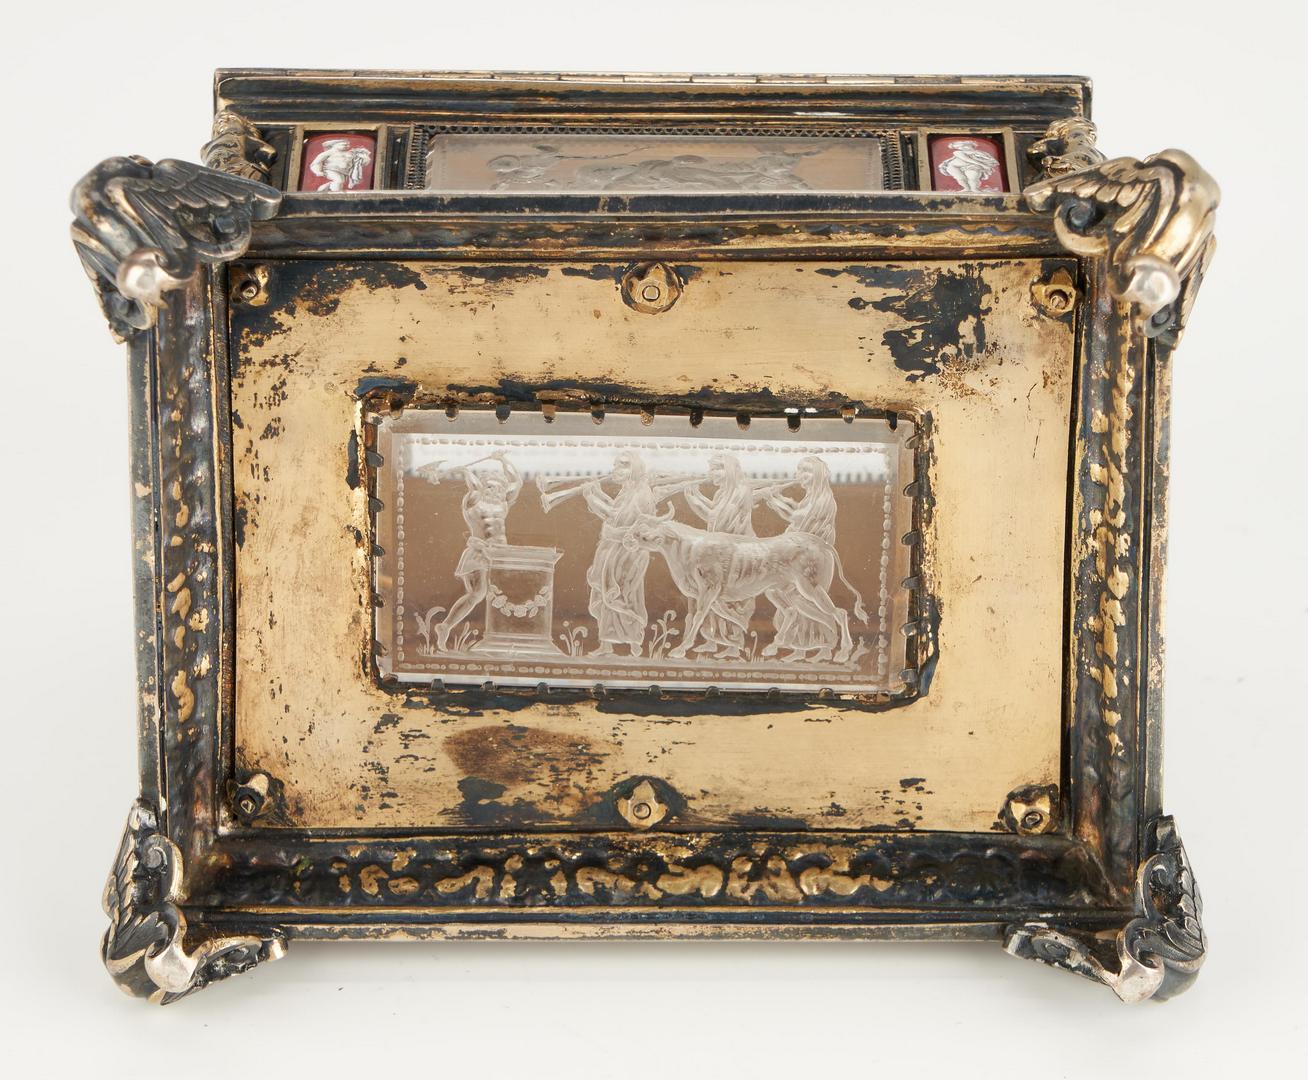 Lot 74: Viennese Gilt Silver, Enamel and Crystal Casket